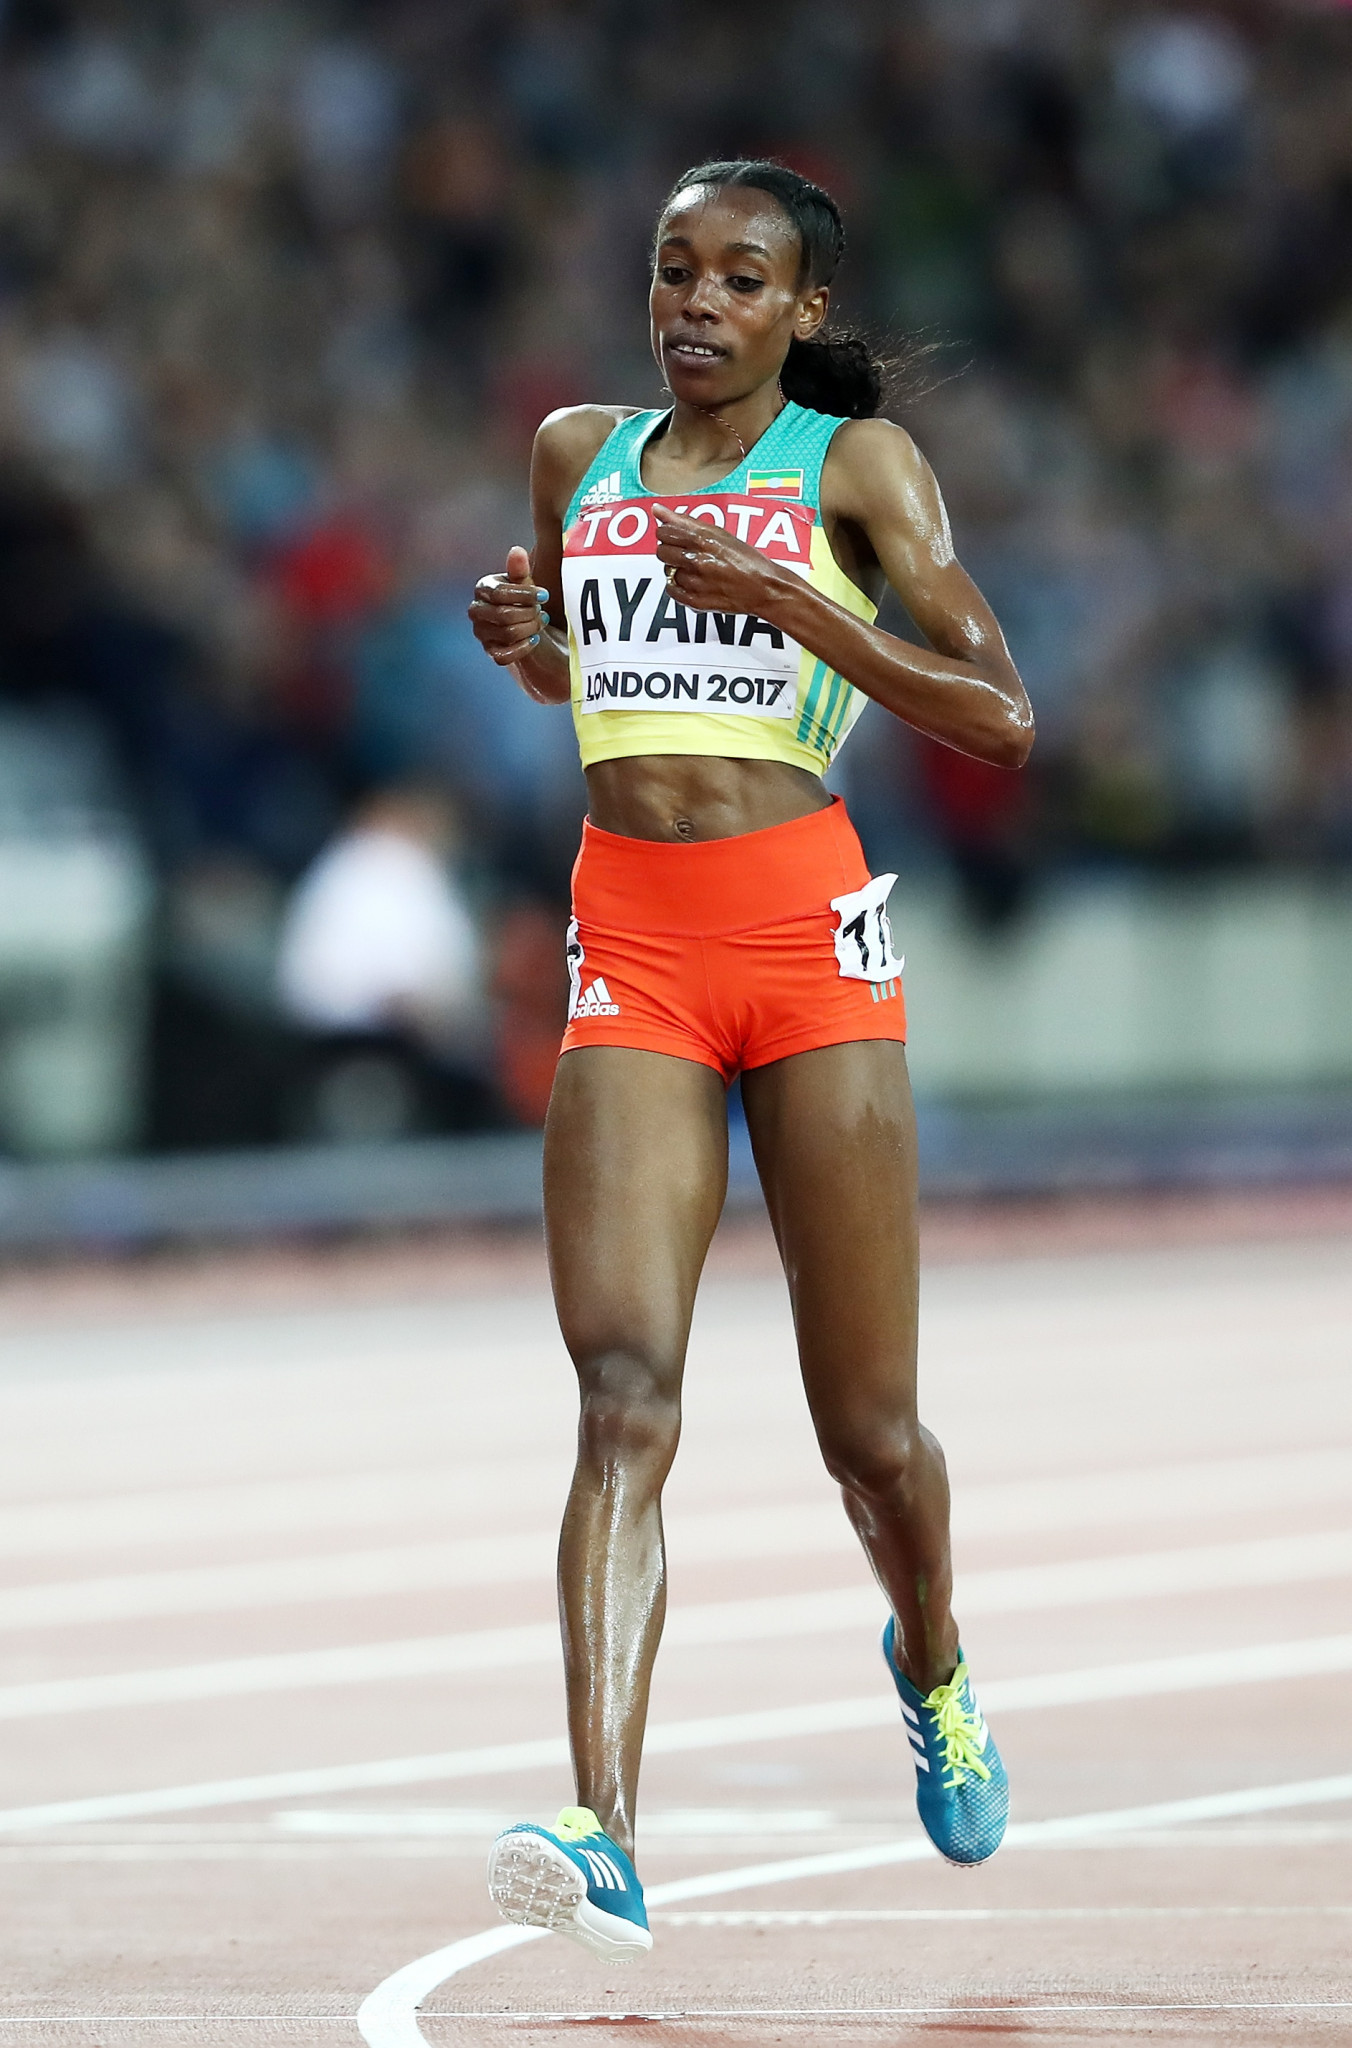 The data captured on Ethiopia's women's world 10,000m champion Almaz Ayana shows a difference of up to 20cm between the length of her strides from right to left ©Getty Images